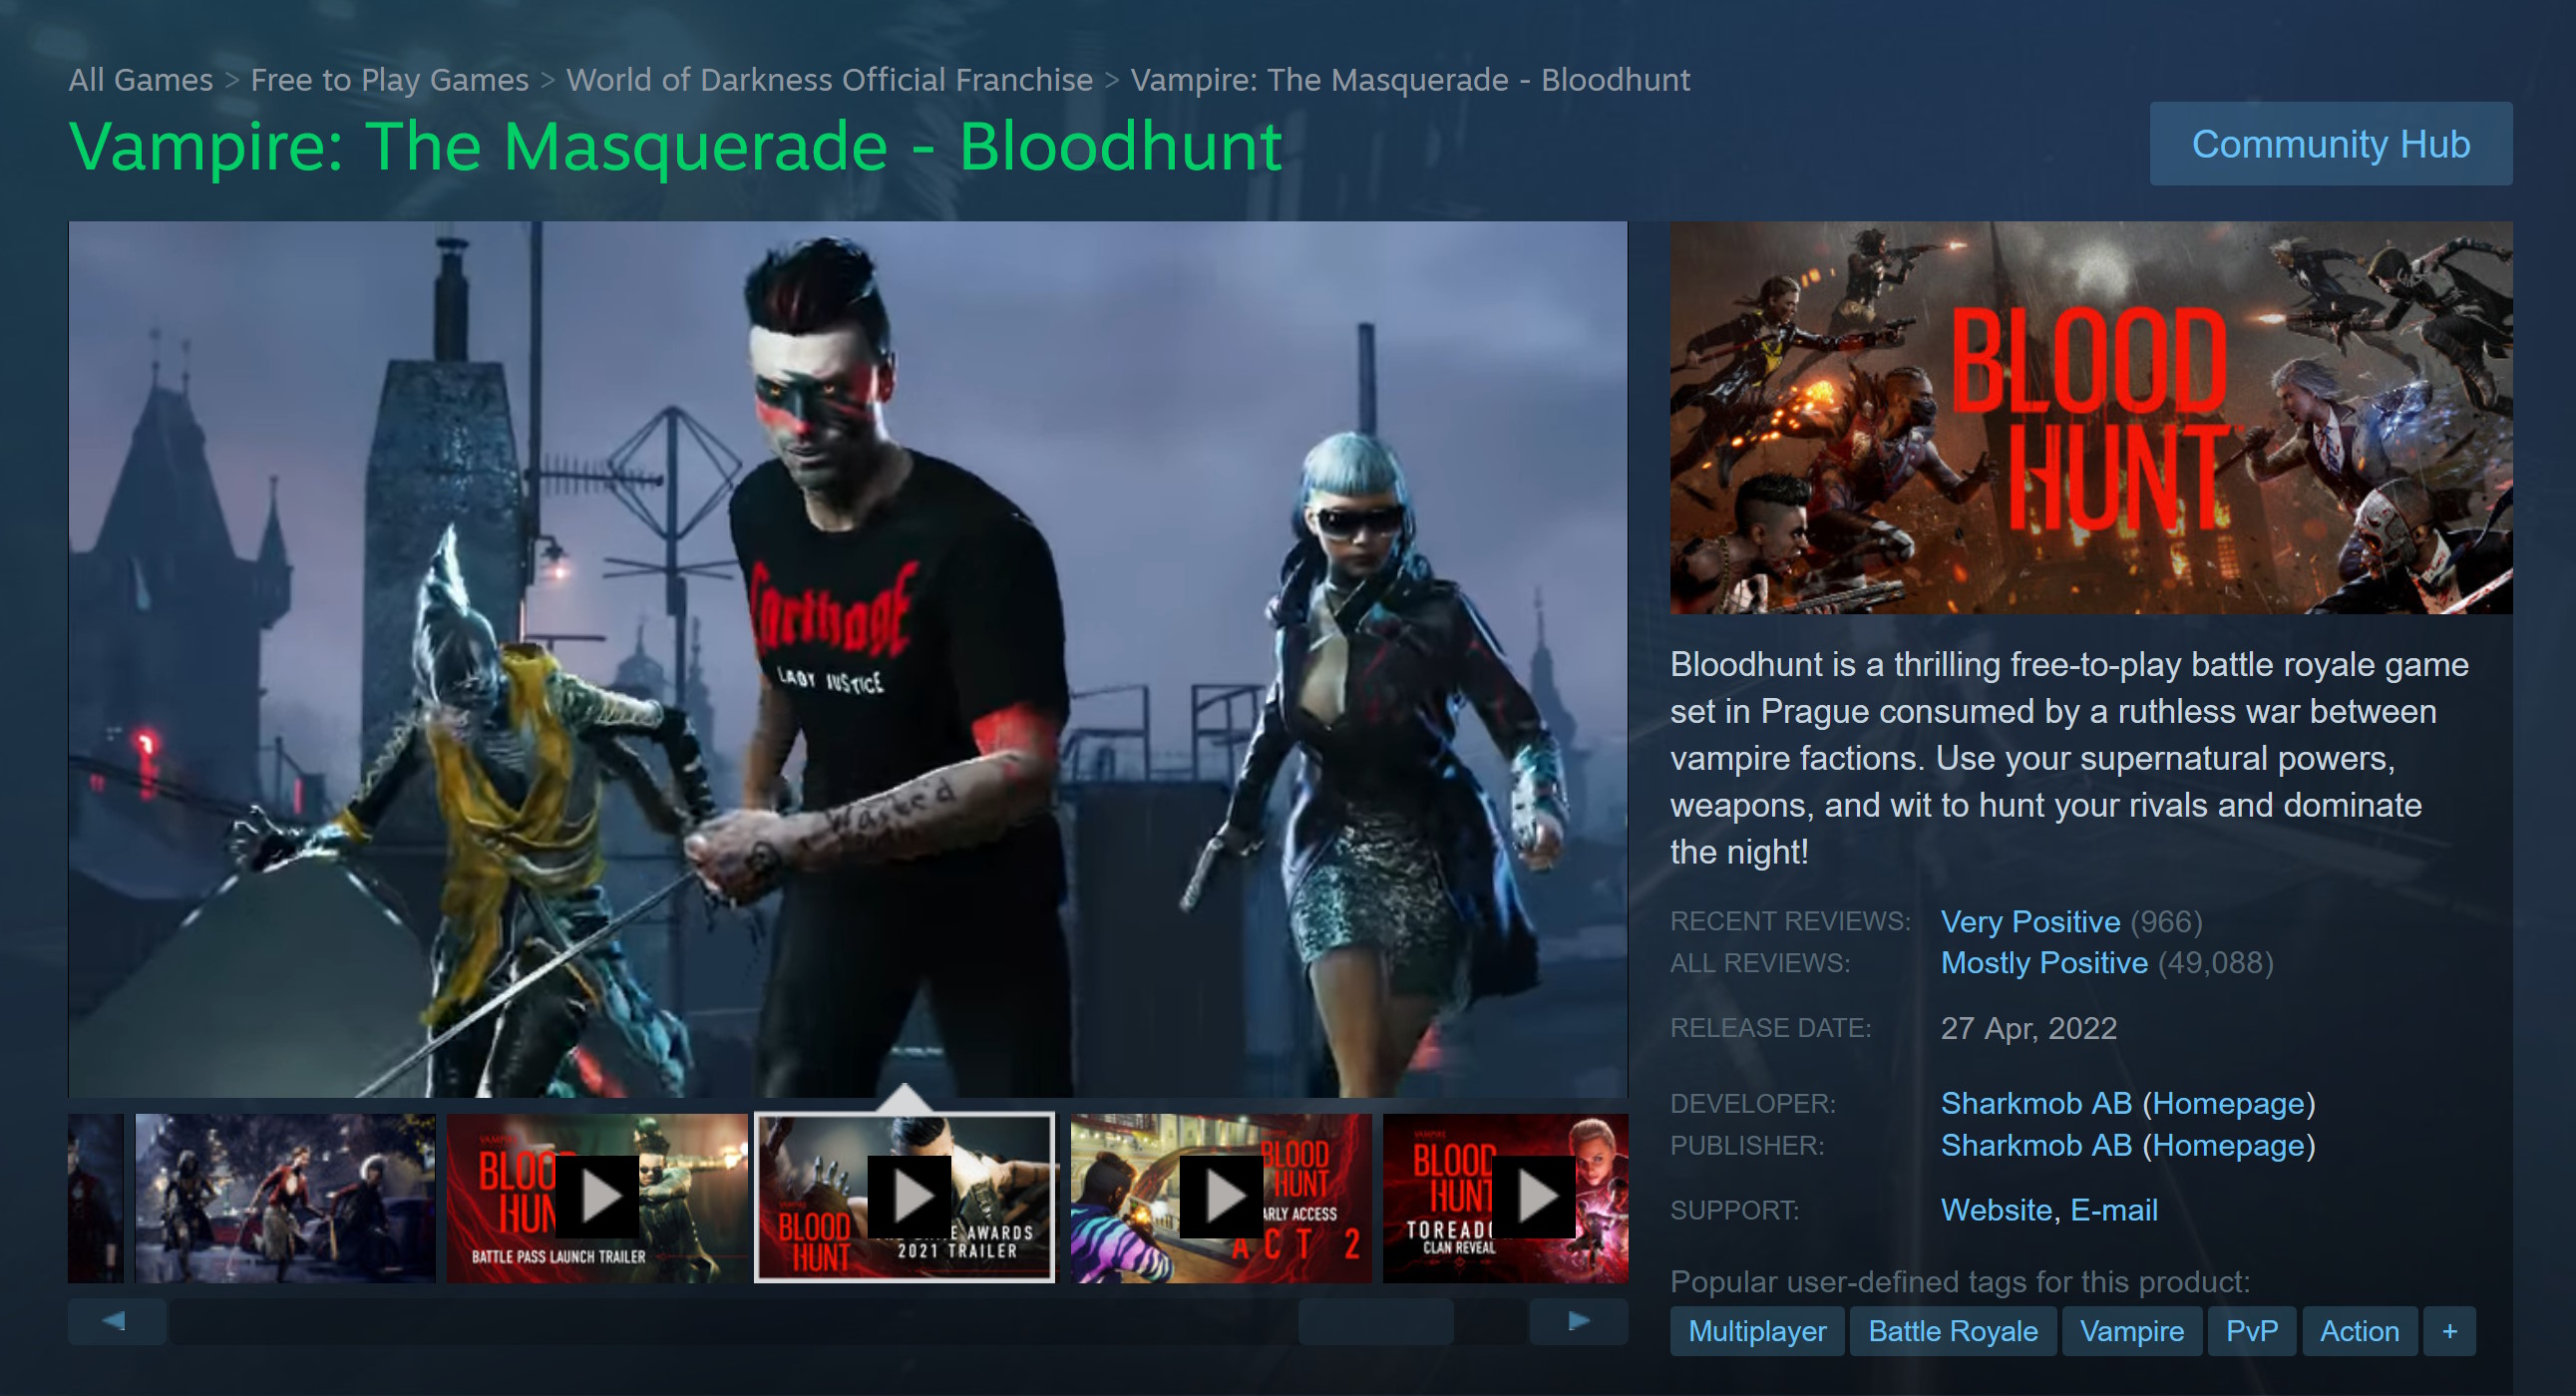 Vampire: The Masquerade - Bloodhunt Steam page detail